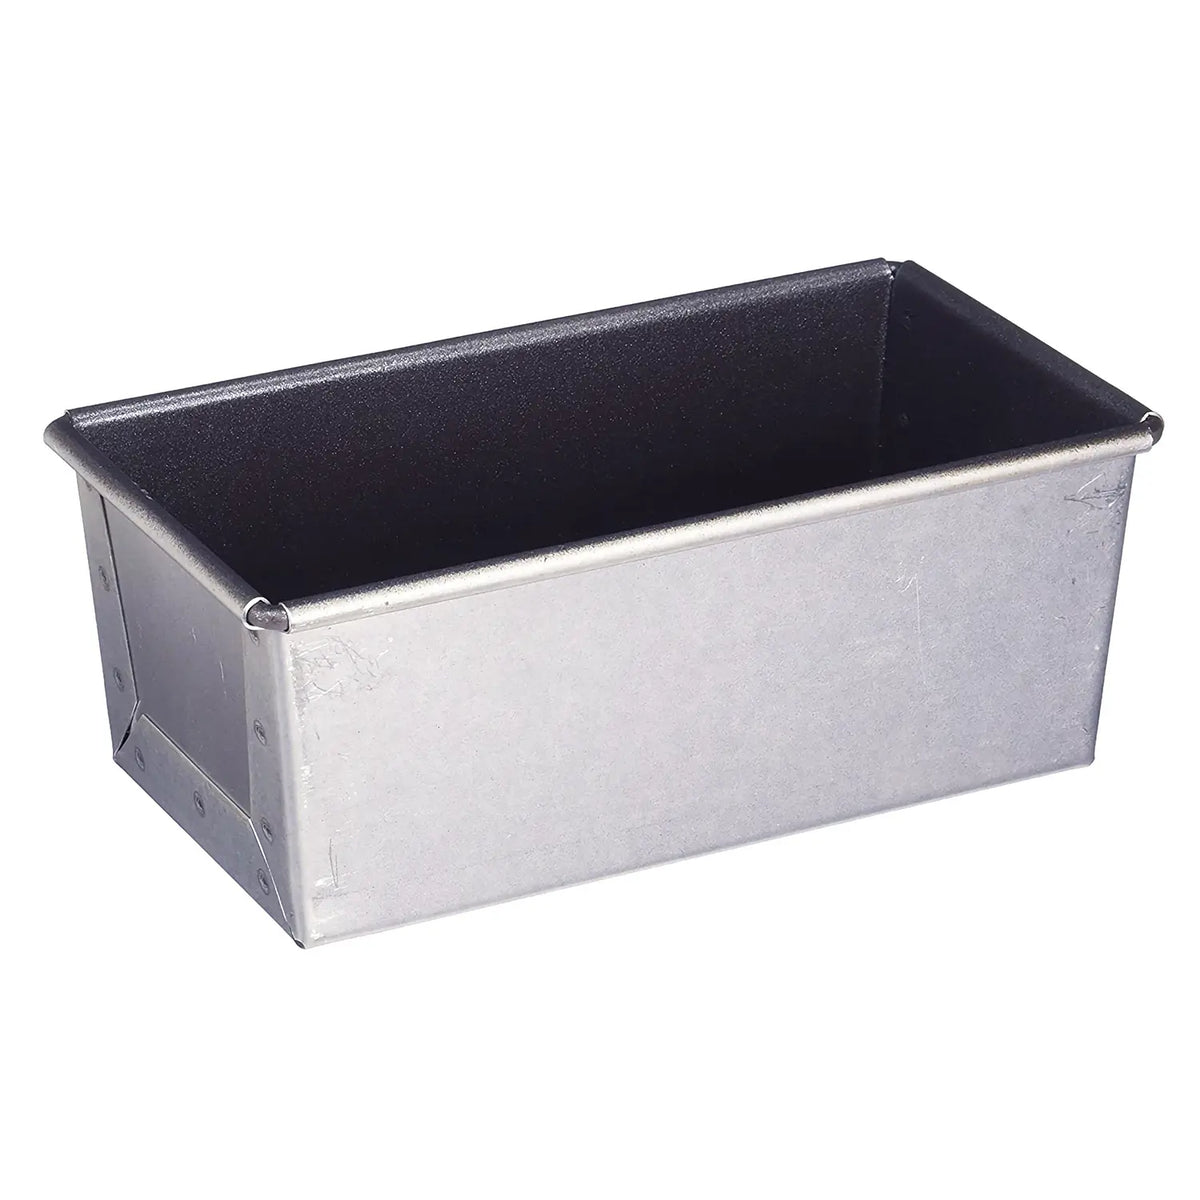 EBM Altaite Fluororesin-coated Loaf Pan